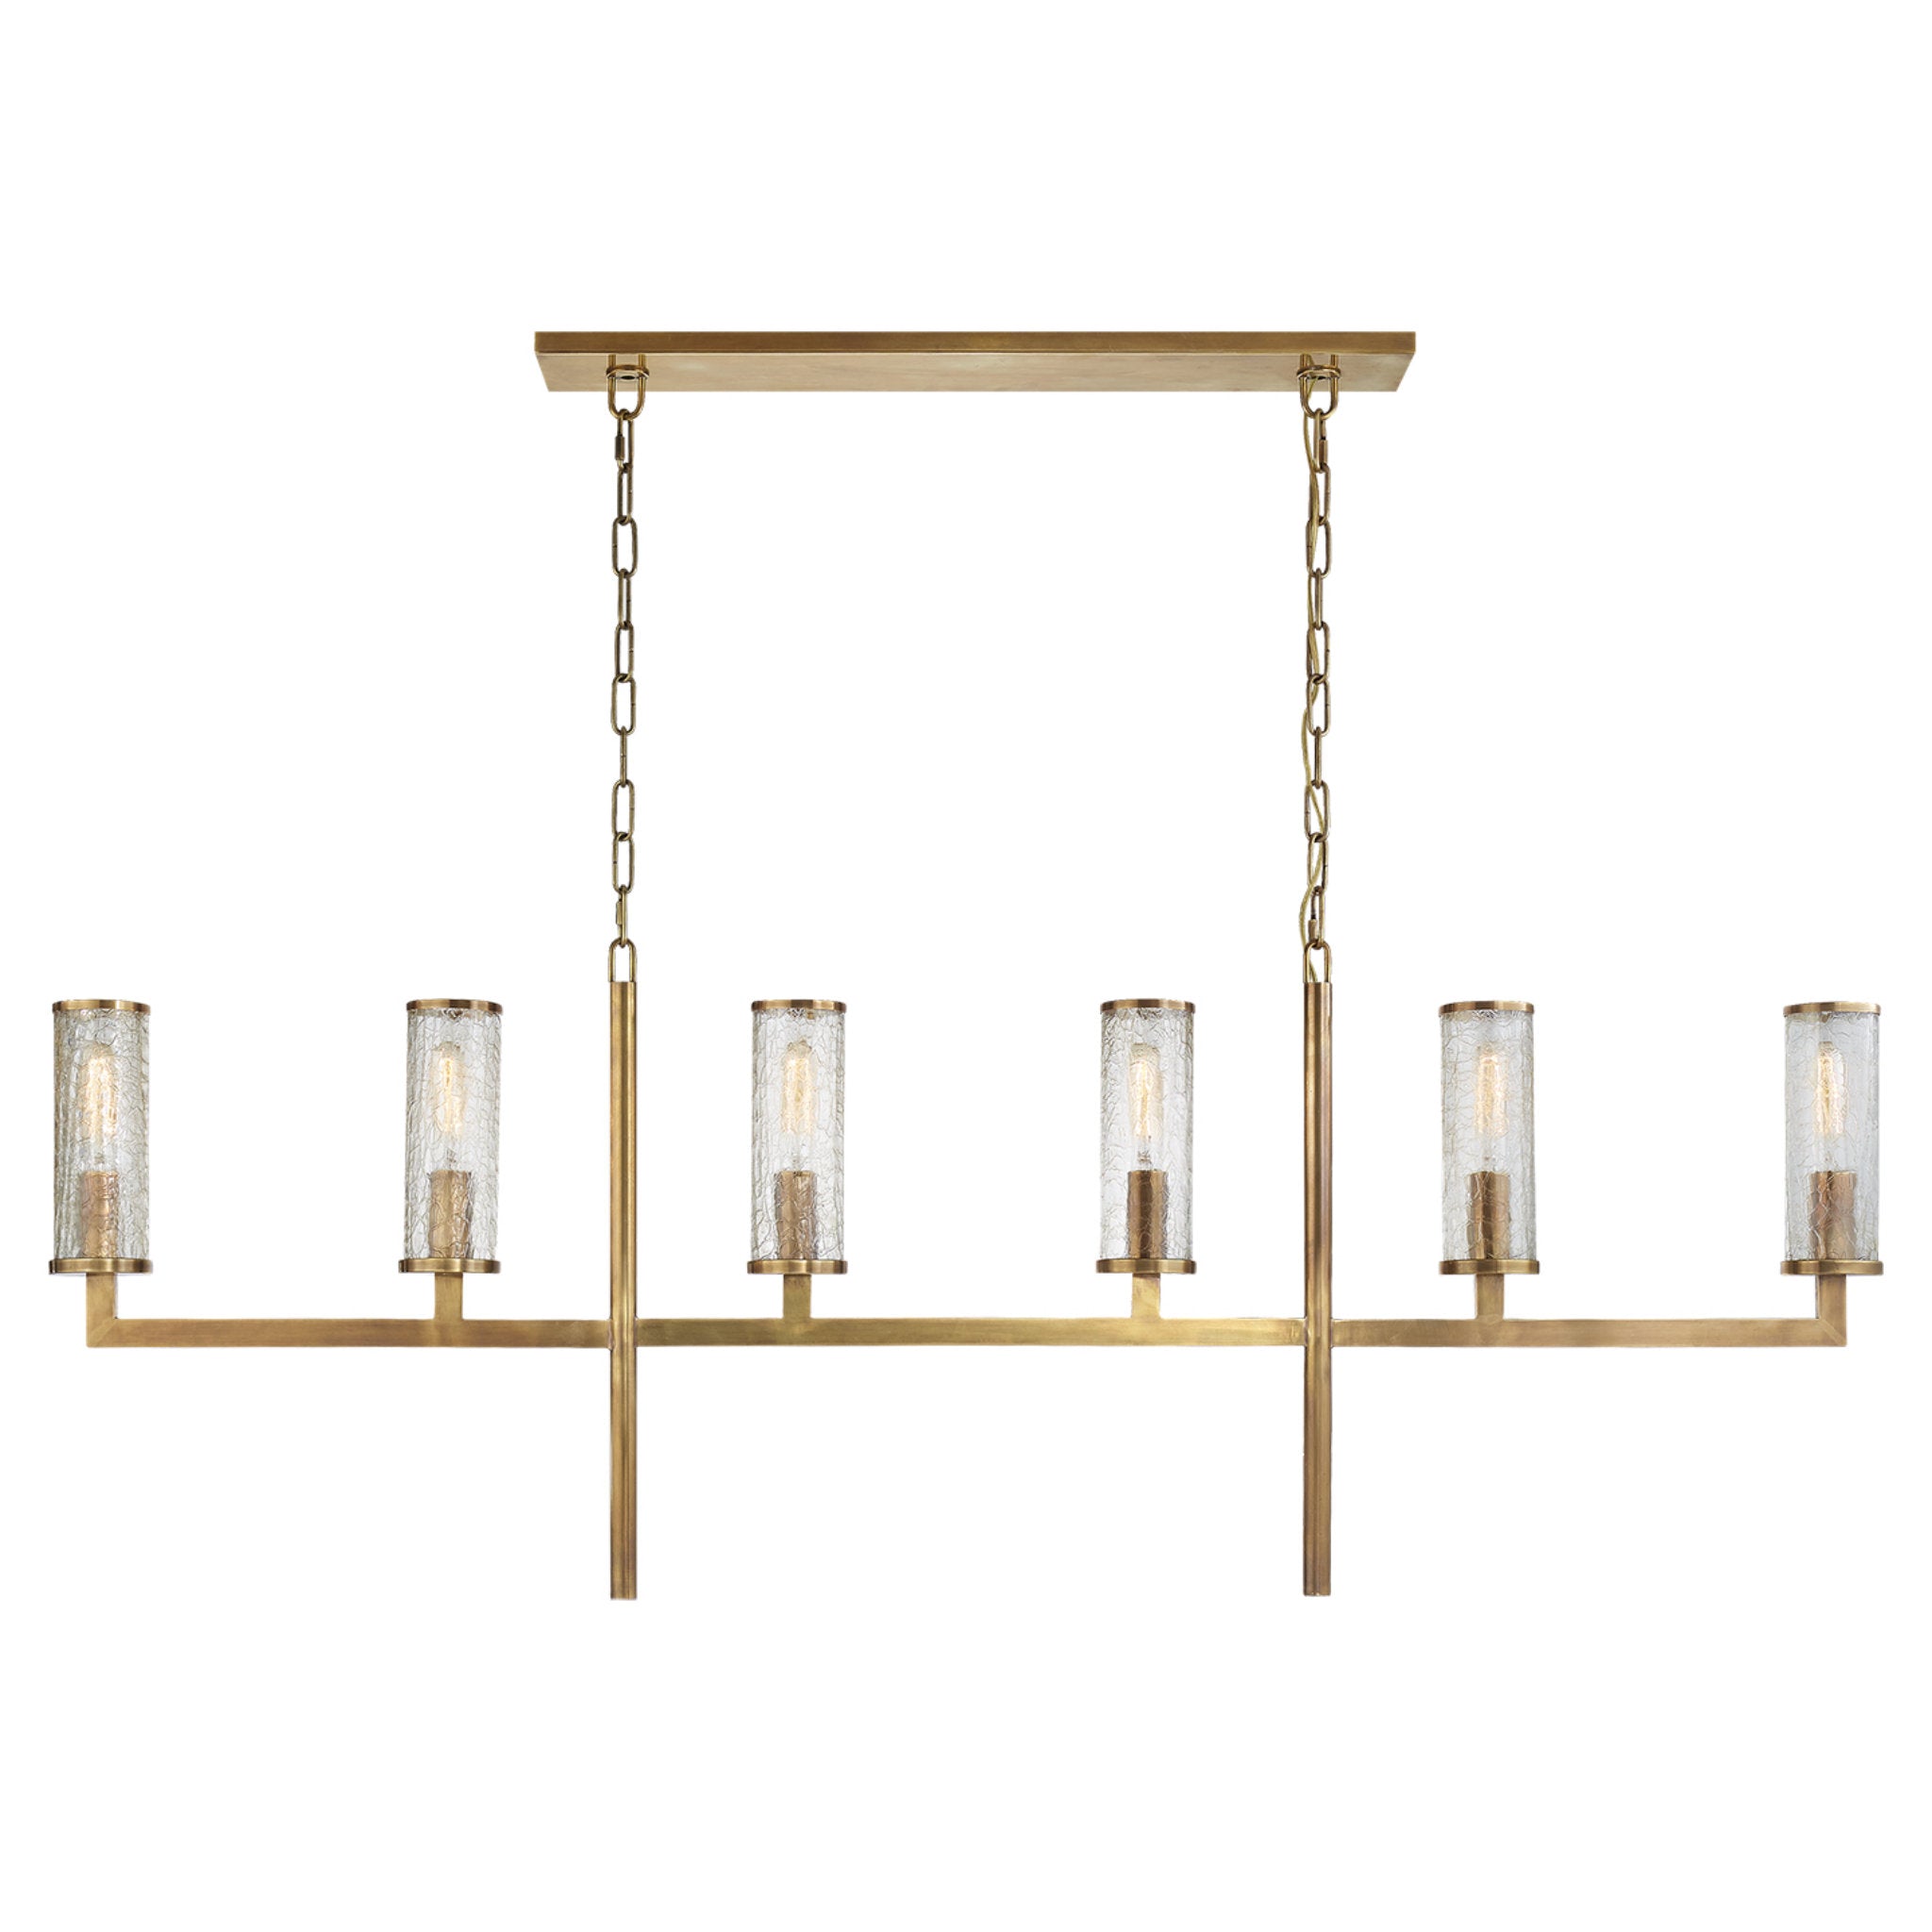 Kelly Wearstler Liaison Large Linear Chandelier in Antique-Burnished Brass with Crackle Glass